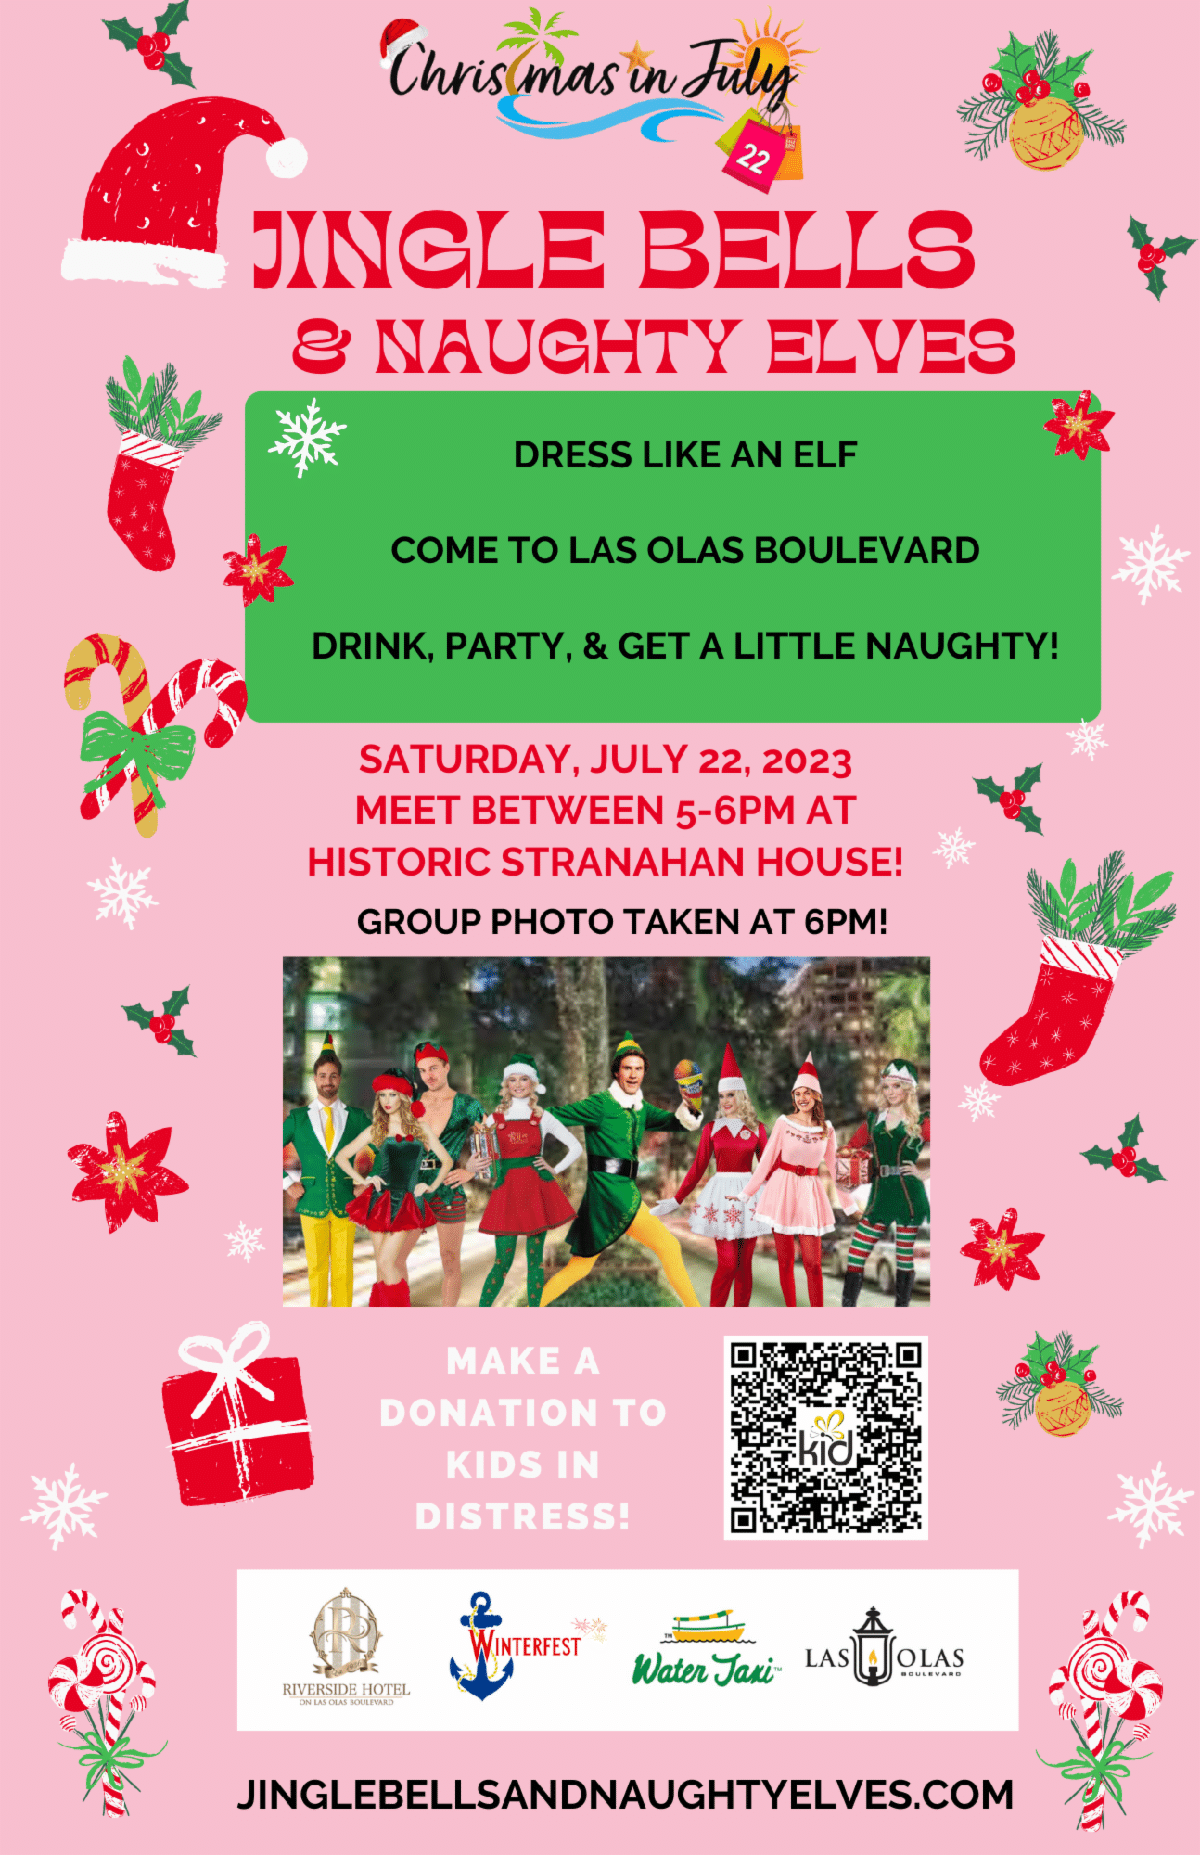 Jingle Bells and Naughty Elves - July 22, 2023 5pm to 6pm - Christmas In July on Las Olas